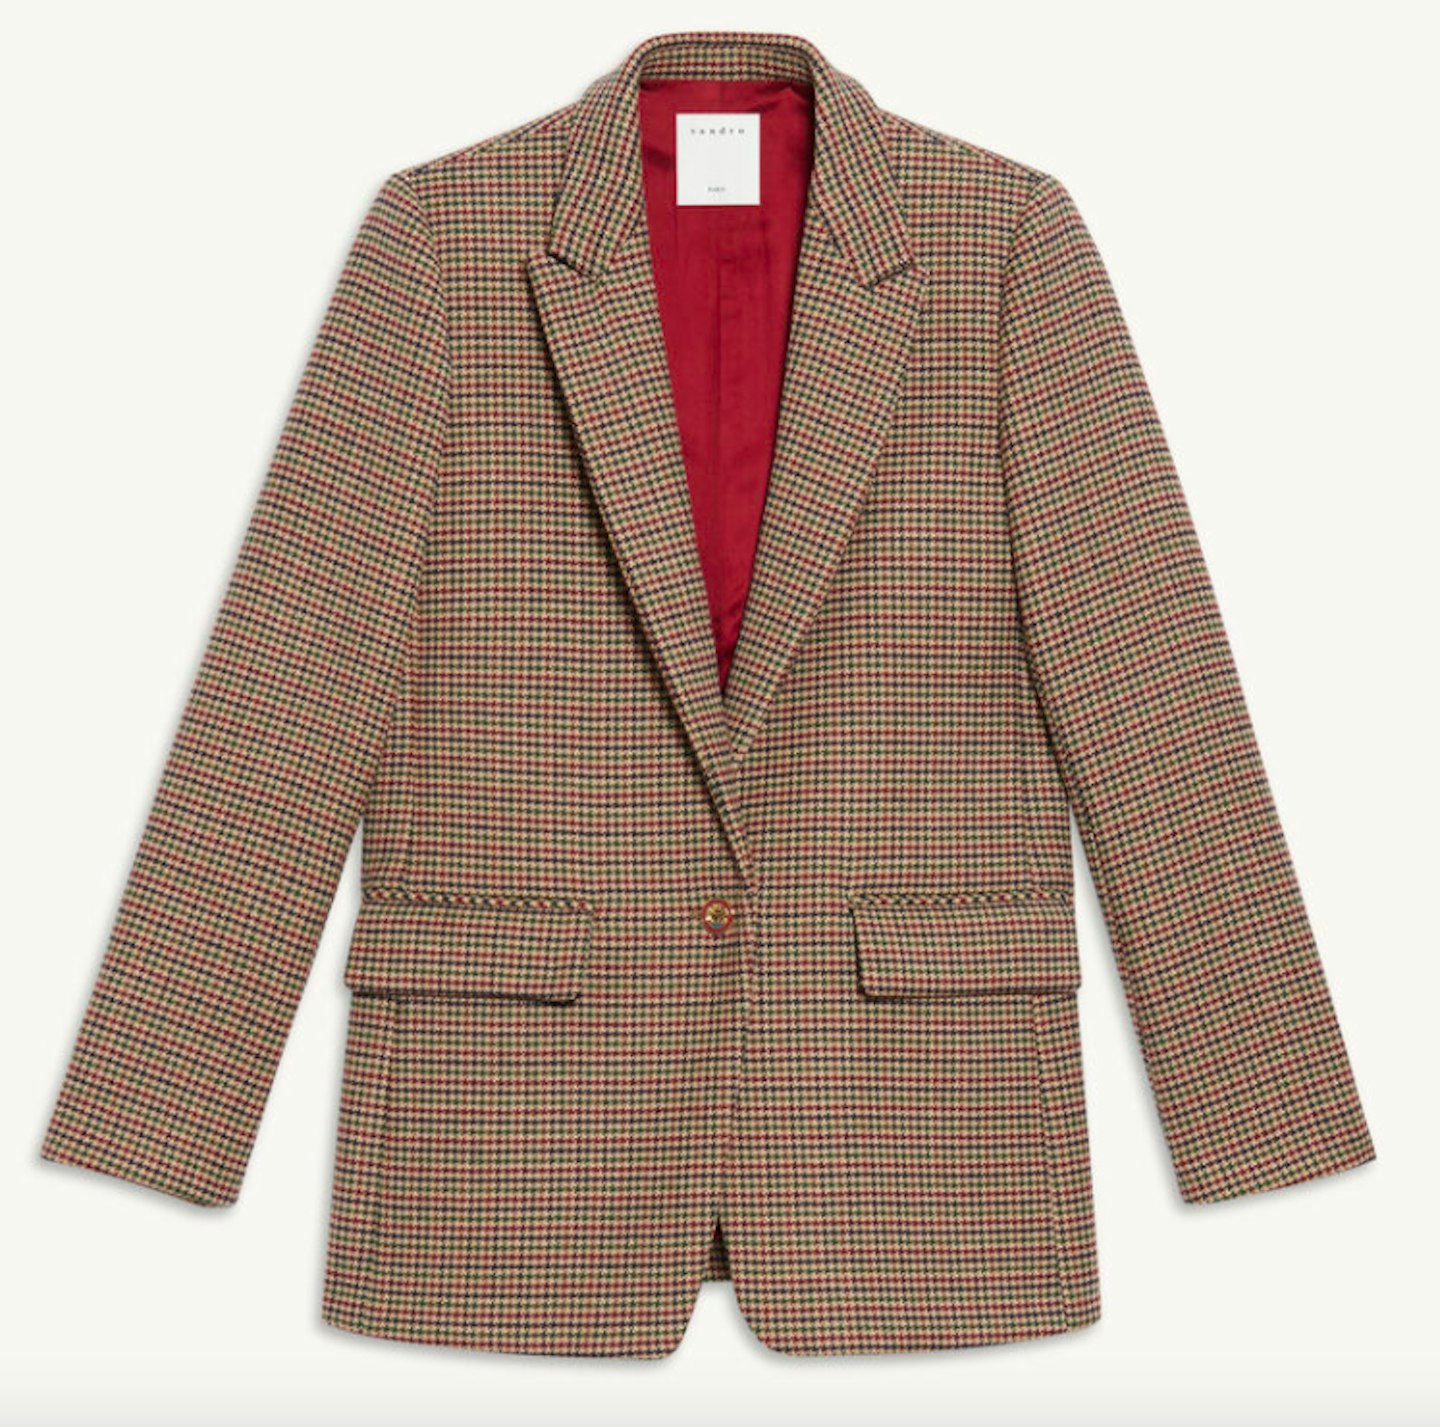 Sandro, Houndstooth Suit Jacket, £409